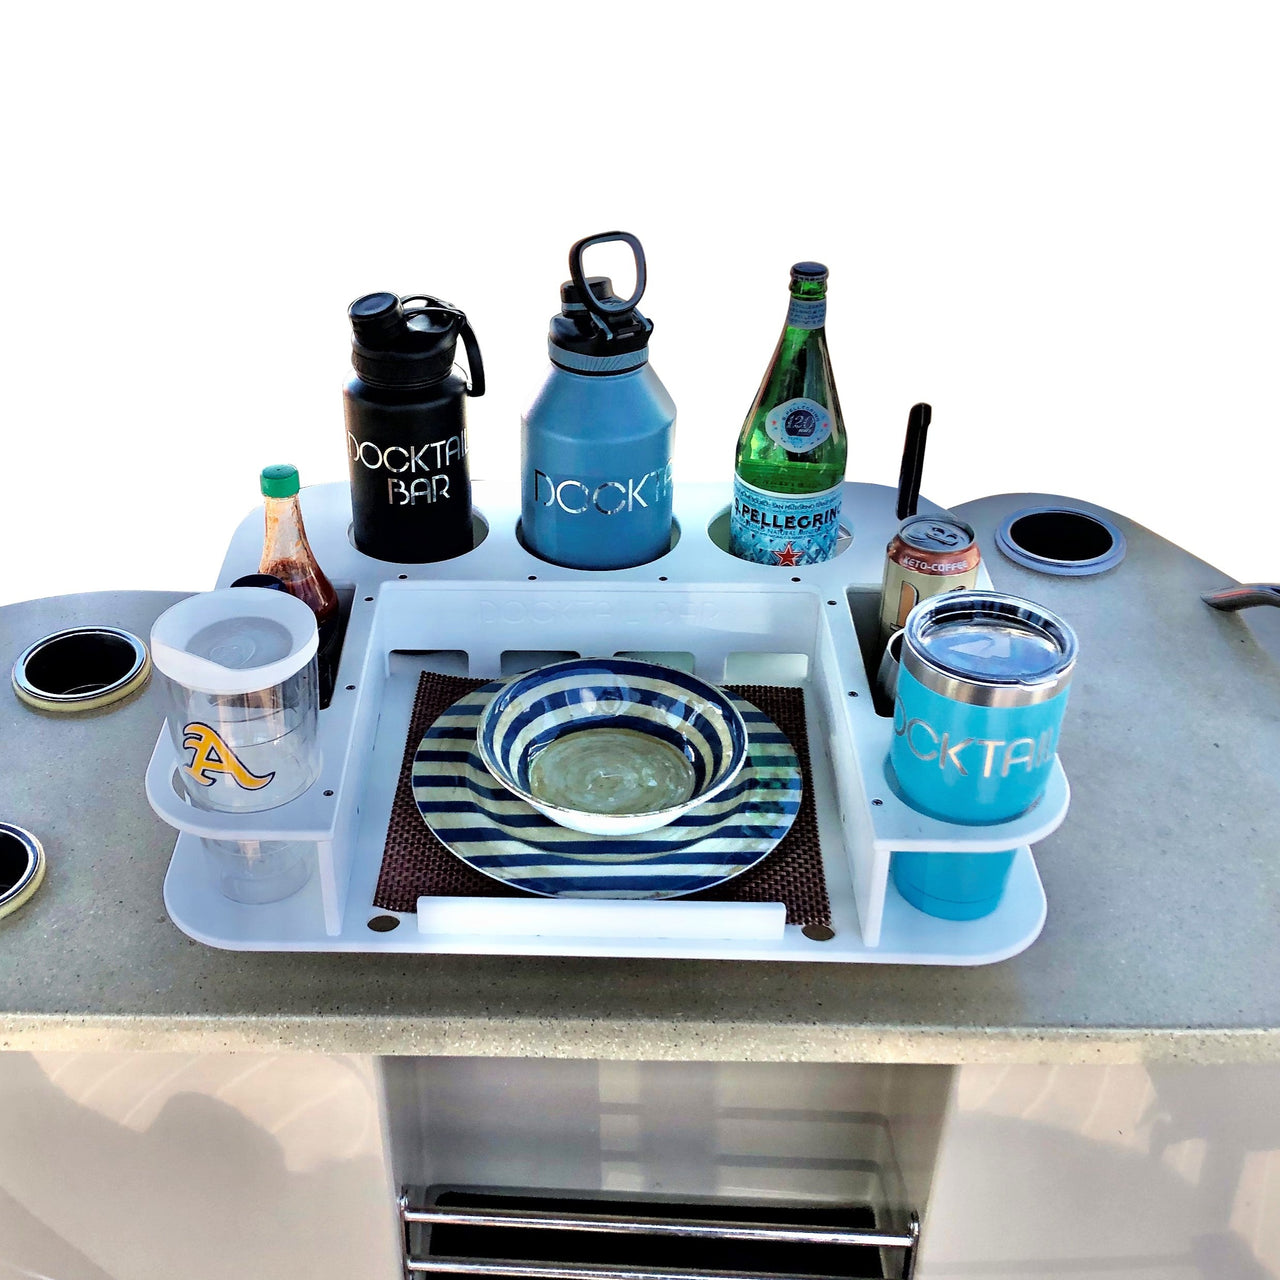 Innovative Boat Table with Cup and Bottle Holders plus Serving Tray - 2 Storage Compartments - Knife and Bottle Opener Holders - Includes 2 Marinized Vacuum Mounts - Weatherproof - Portable - Multiple Colors Available - Butler Model - Docktail Bar